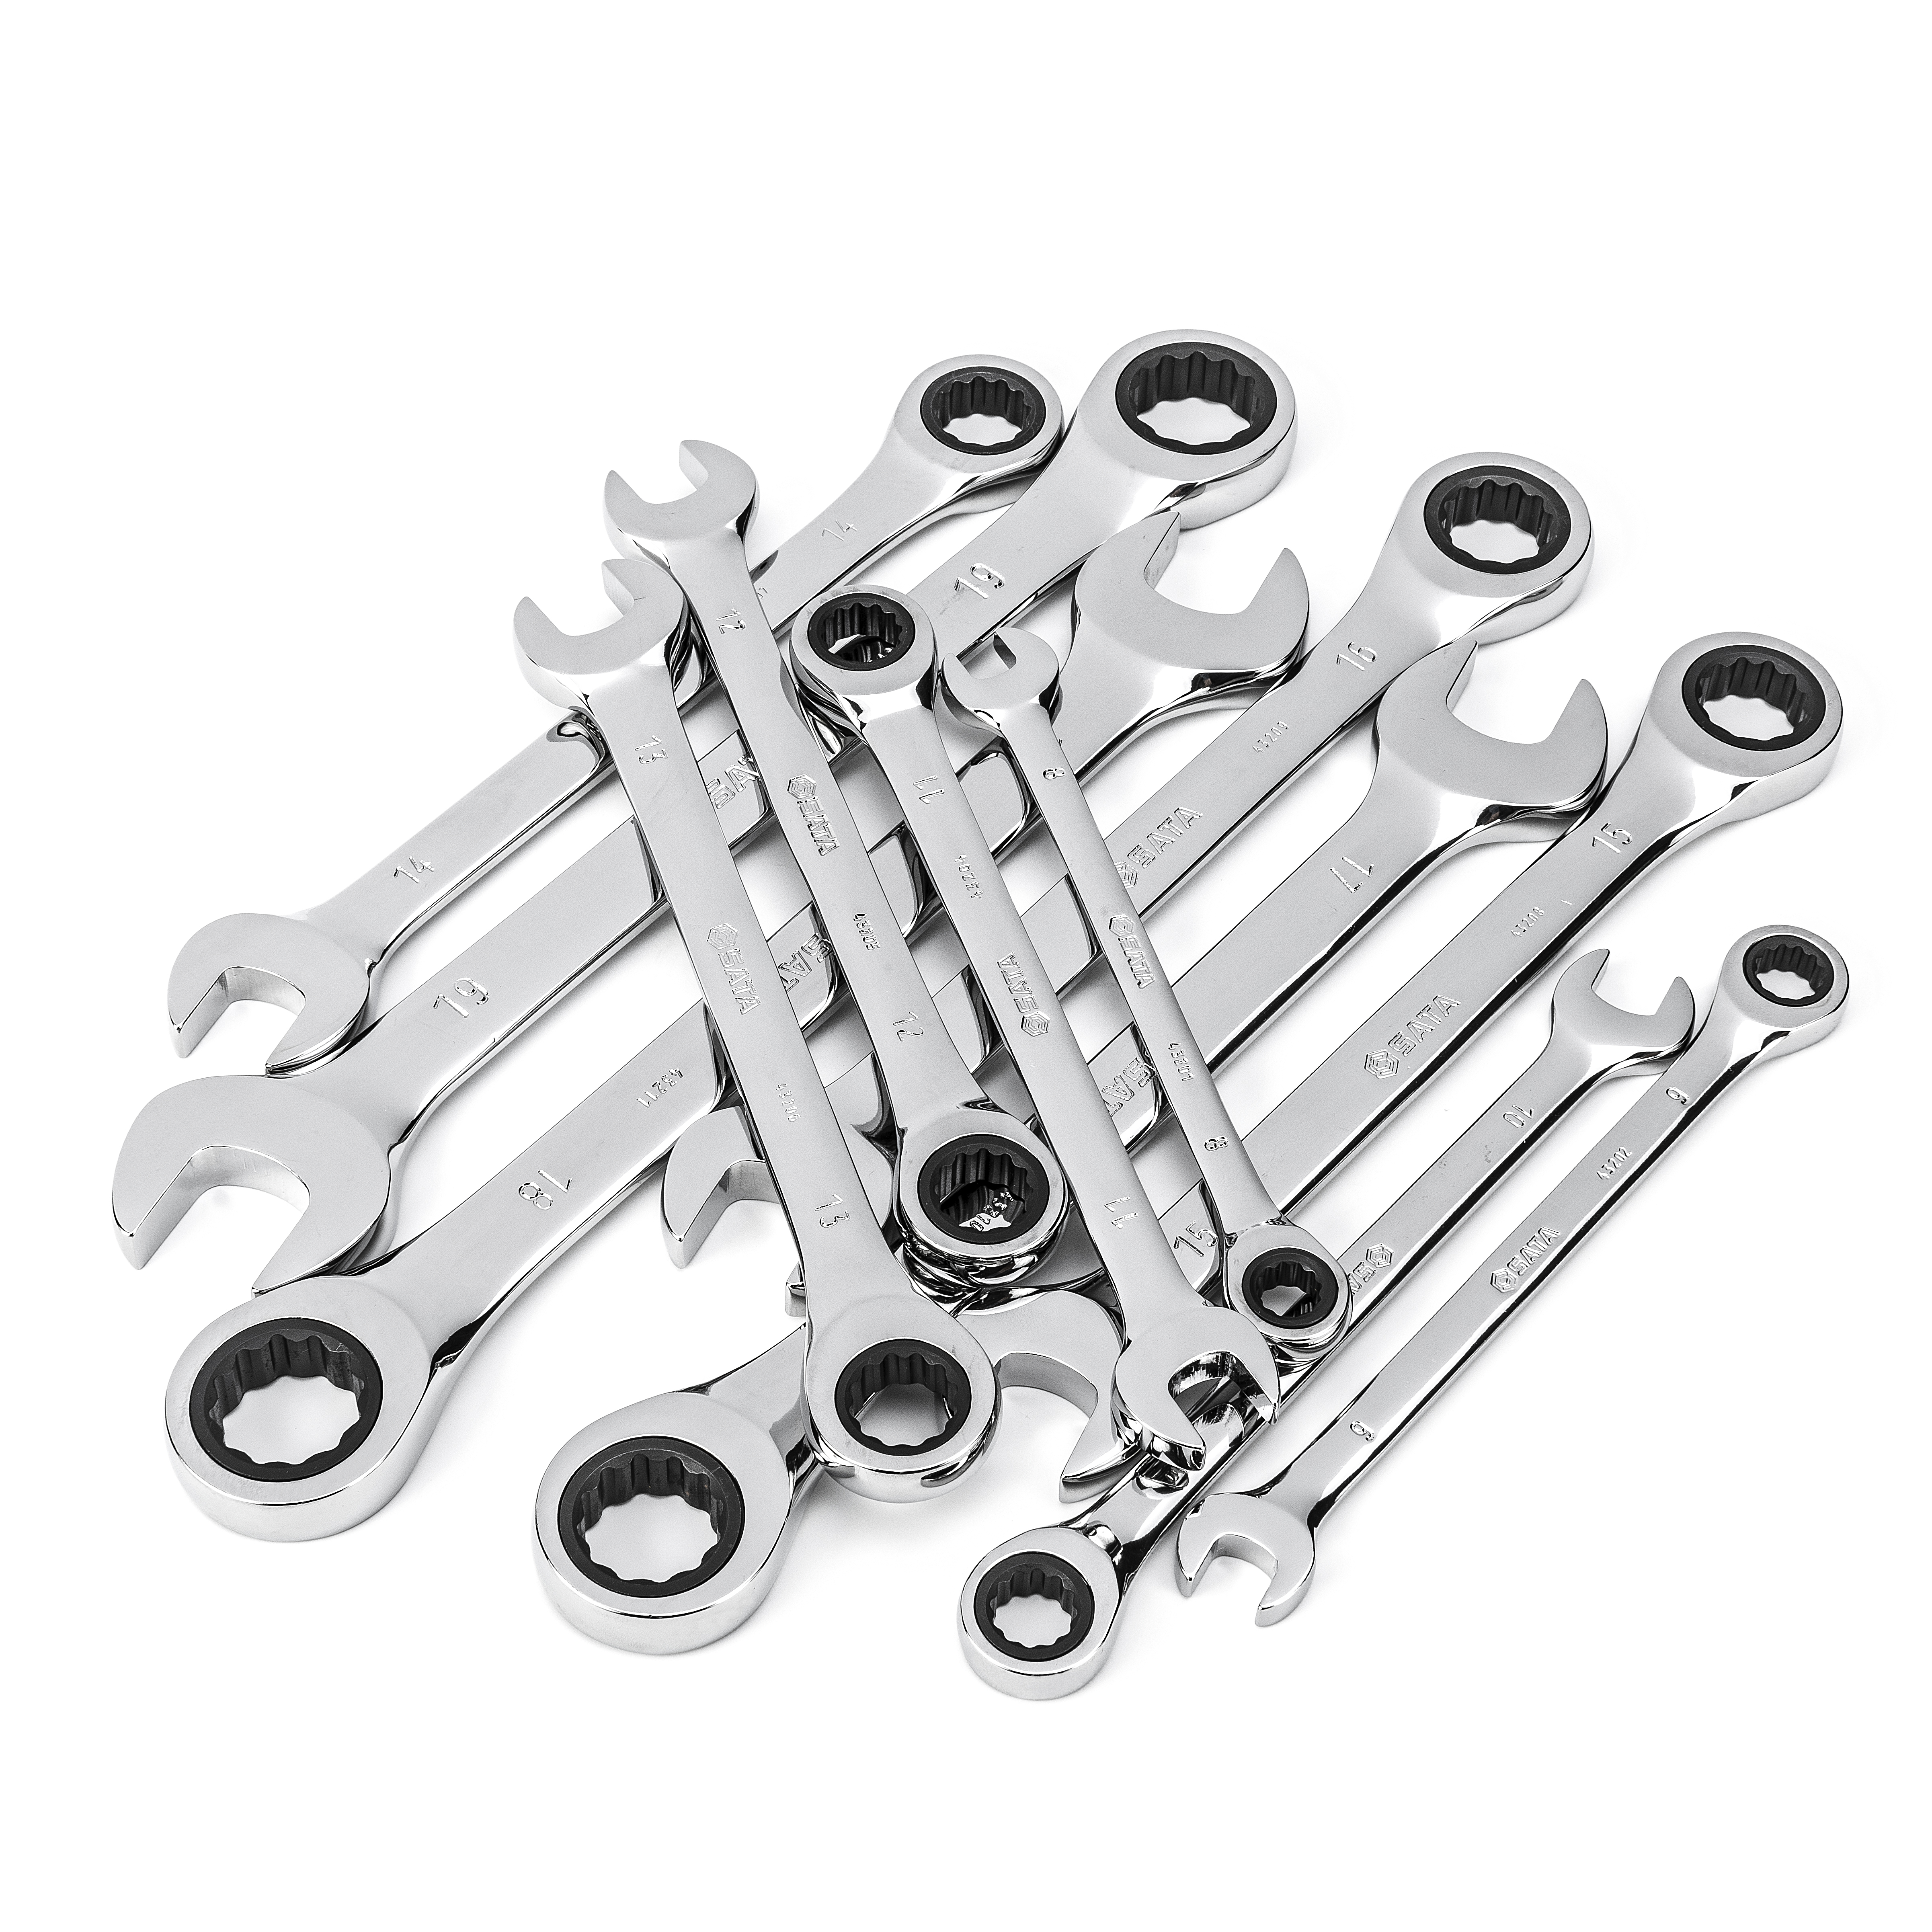 Insulated Ratcheting Box Wrenches | Jameson Tools | JT-WR Series